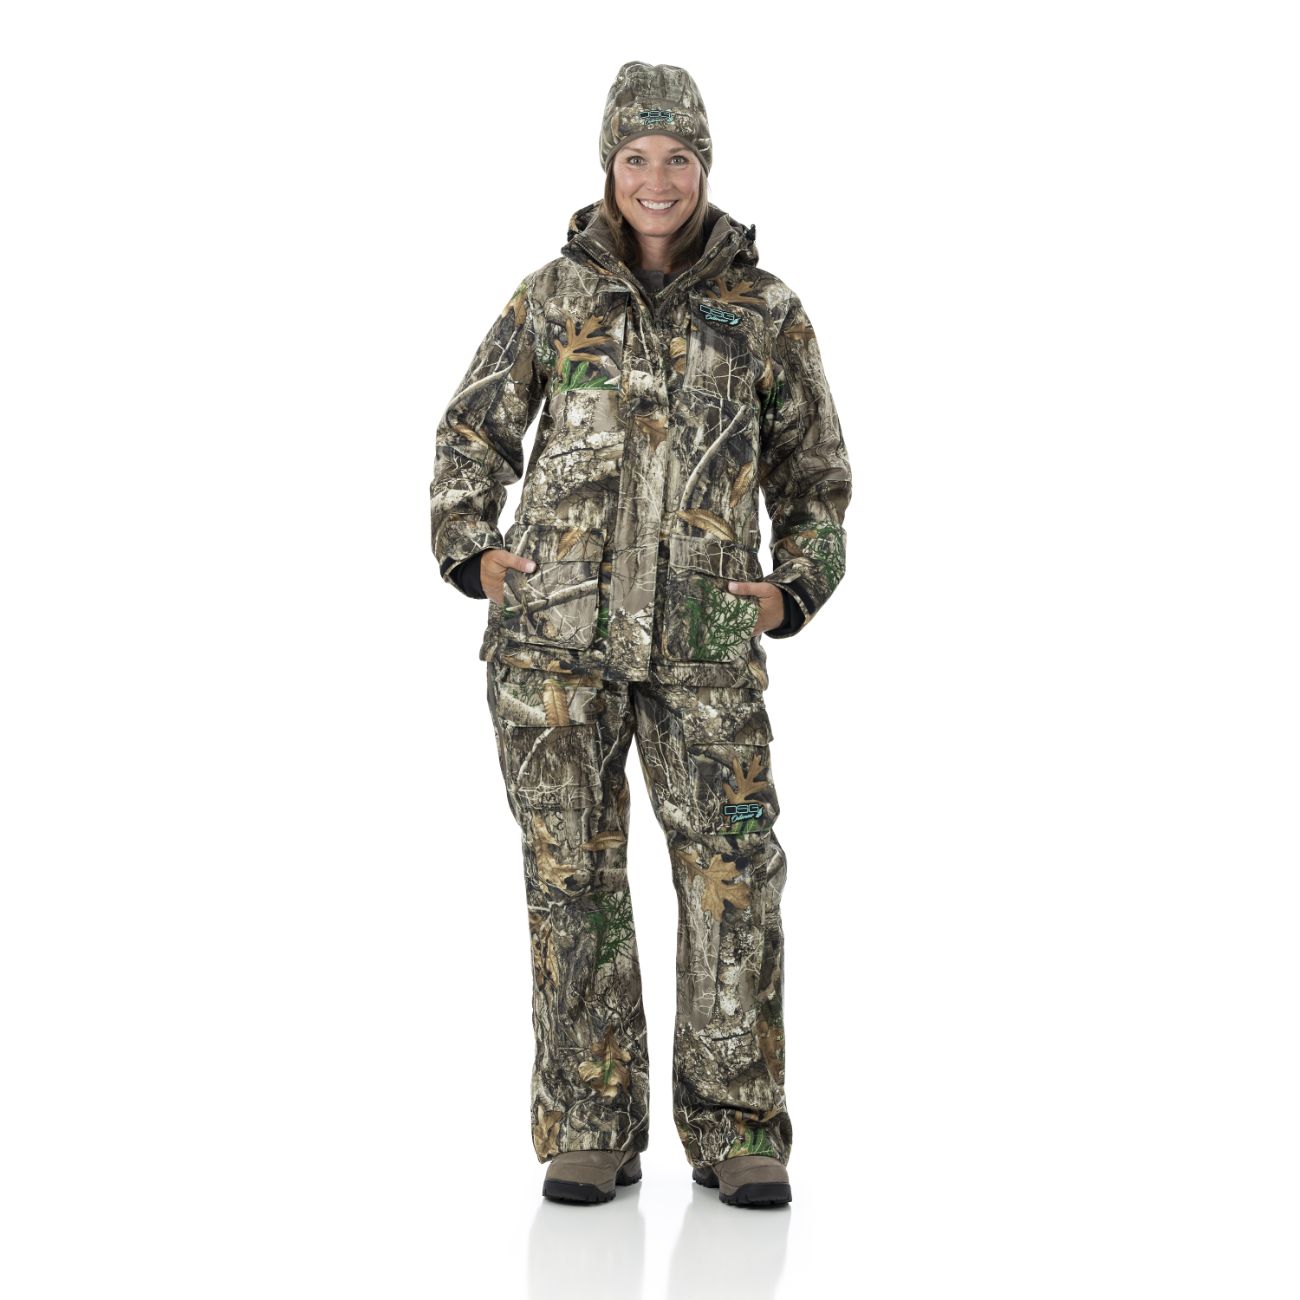 DSG Outerwear Kylie 4.0 3-in-1 MAX 7 Hunting Jacket NWT WOMENS